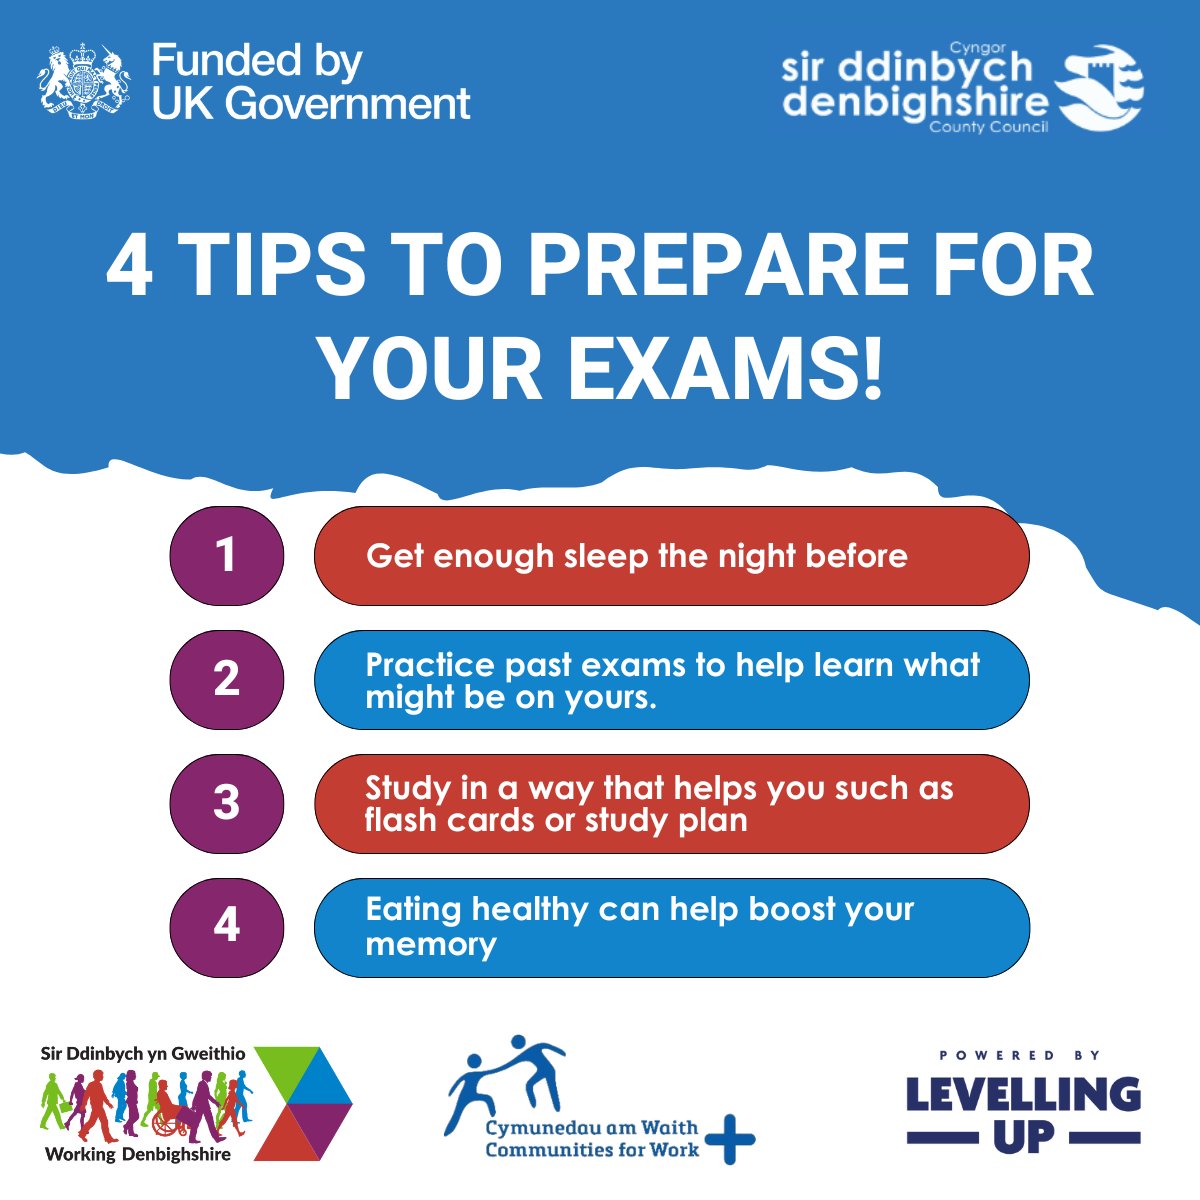 We have put together 4 tips and tricks to help you prepare for your exams. 📝 Contact us today for more help at: Working.Denbighshire.gov.uk To learn more visit: denbighshire.gov.uk/working-denbig…